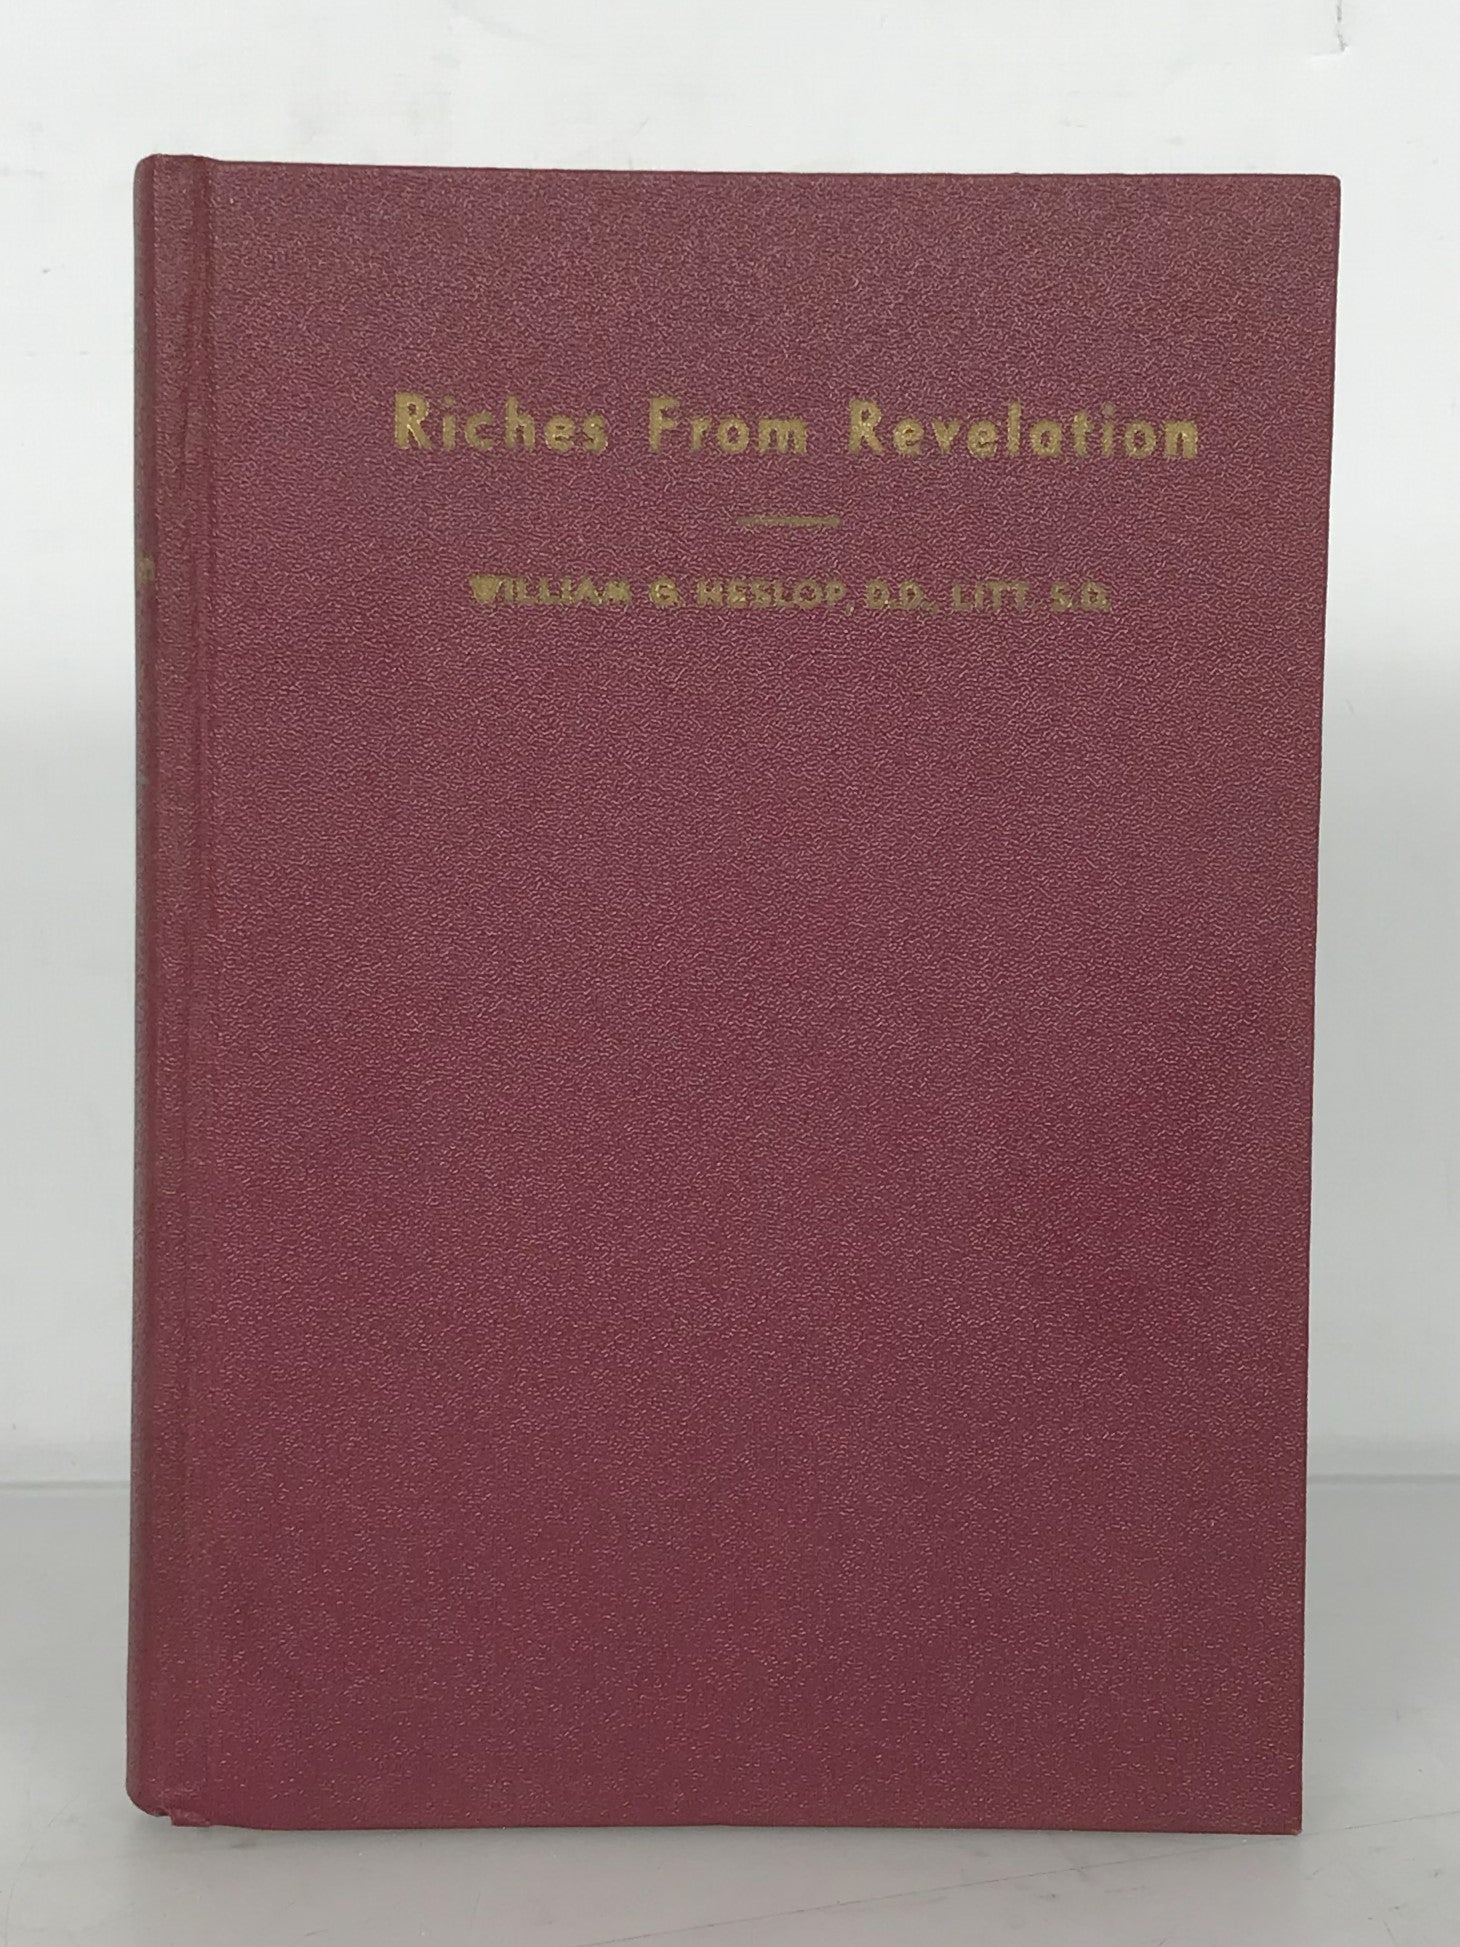 Riches from Revelation by W.G. Heslop 1932 HC DJ